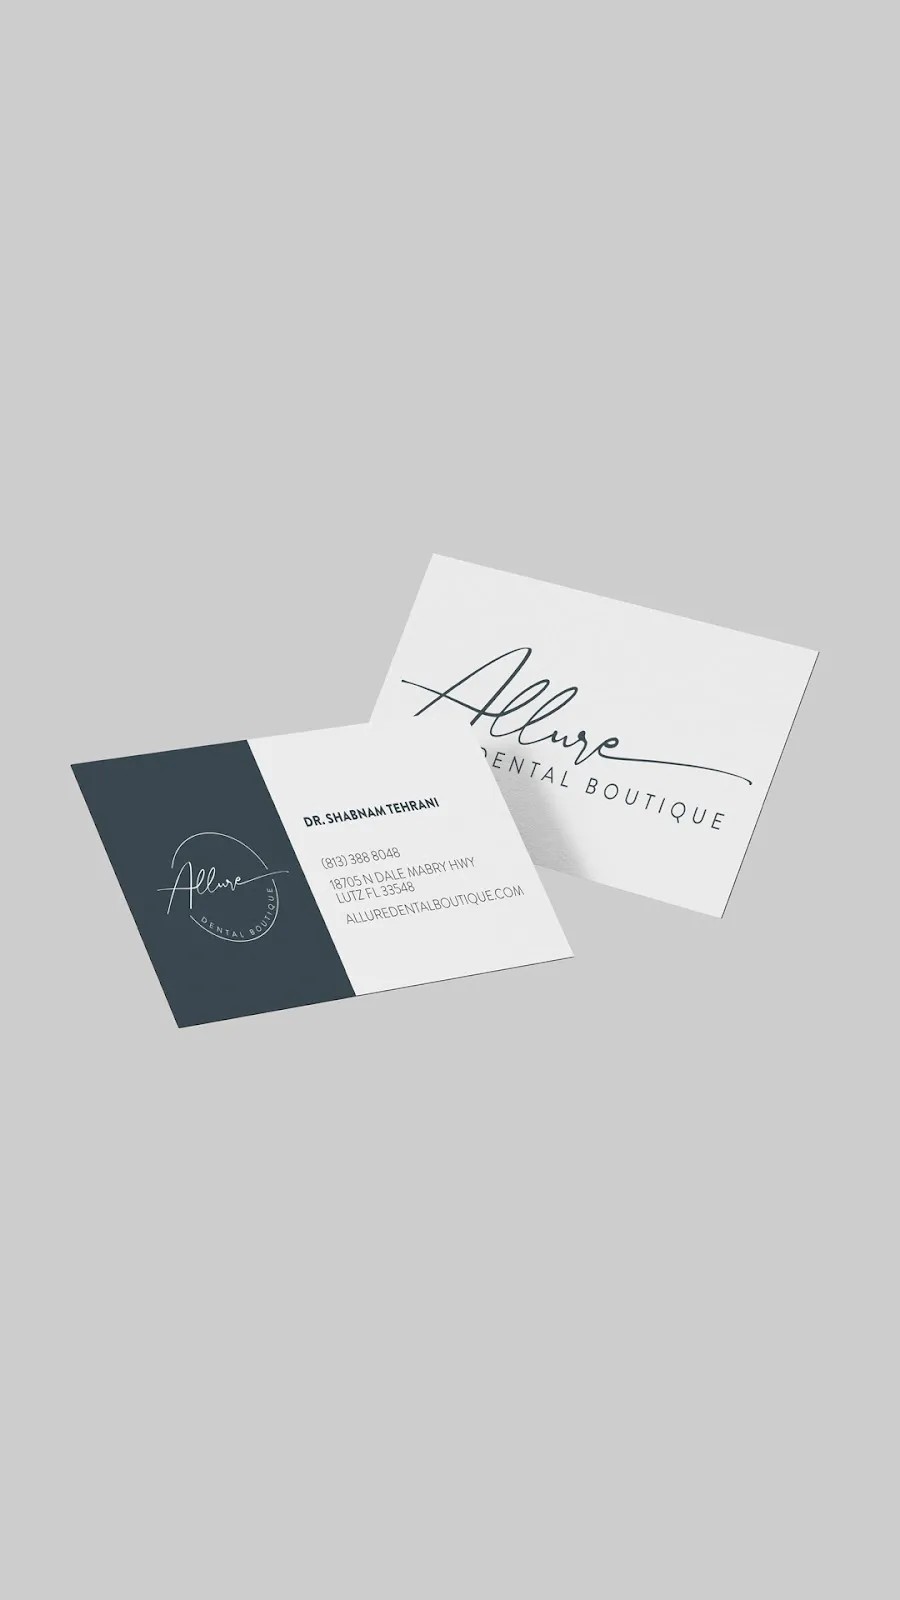 Two business cards for allure dental boutique featuring a minimalistic design with white and dark blue colors, showcasing logo and contact information.